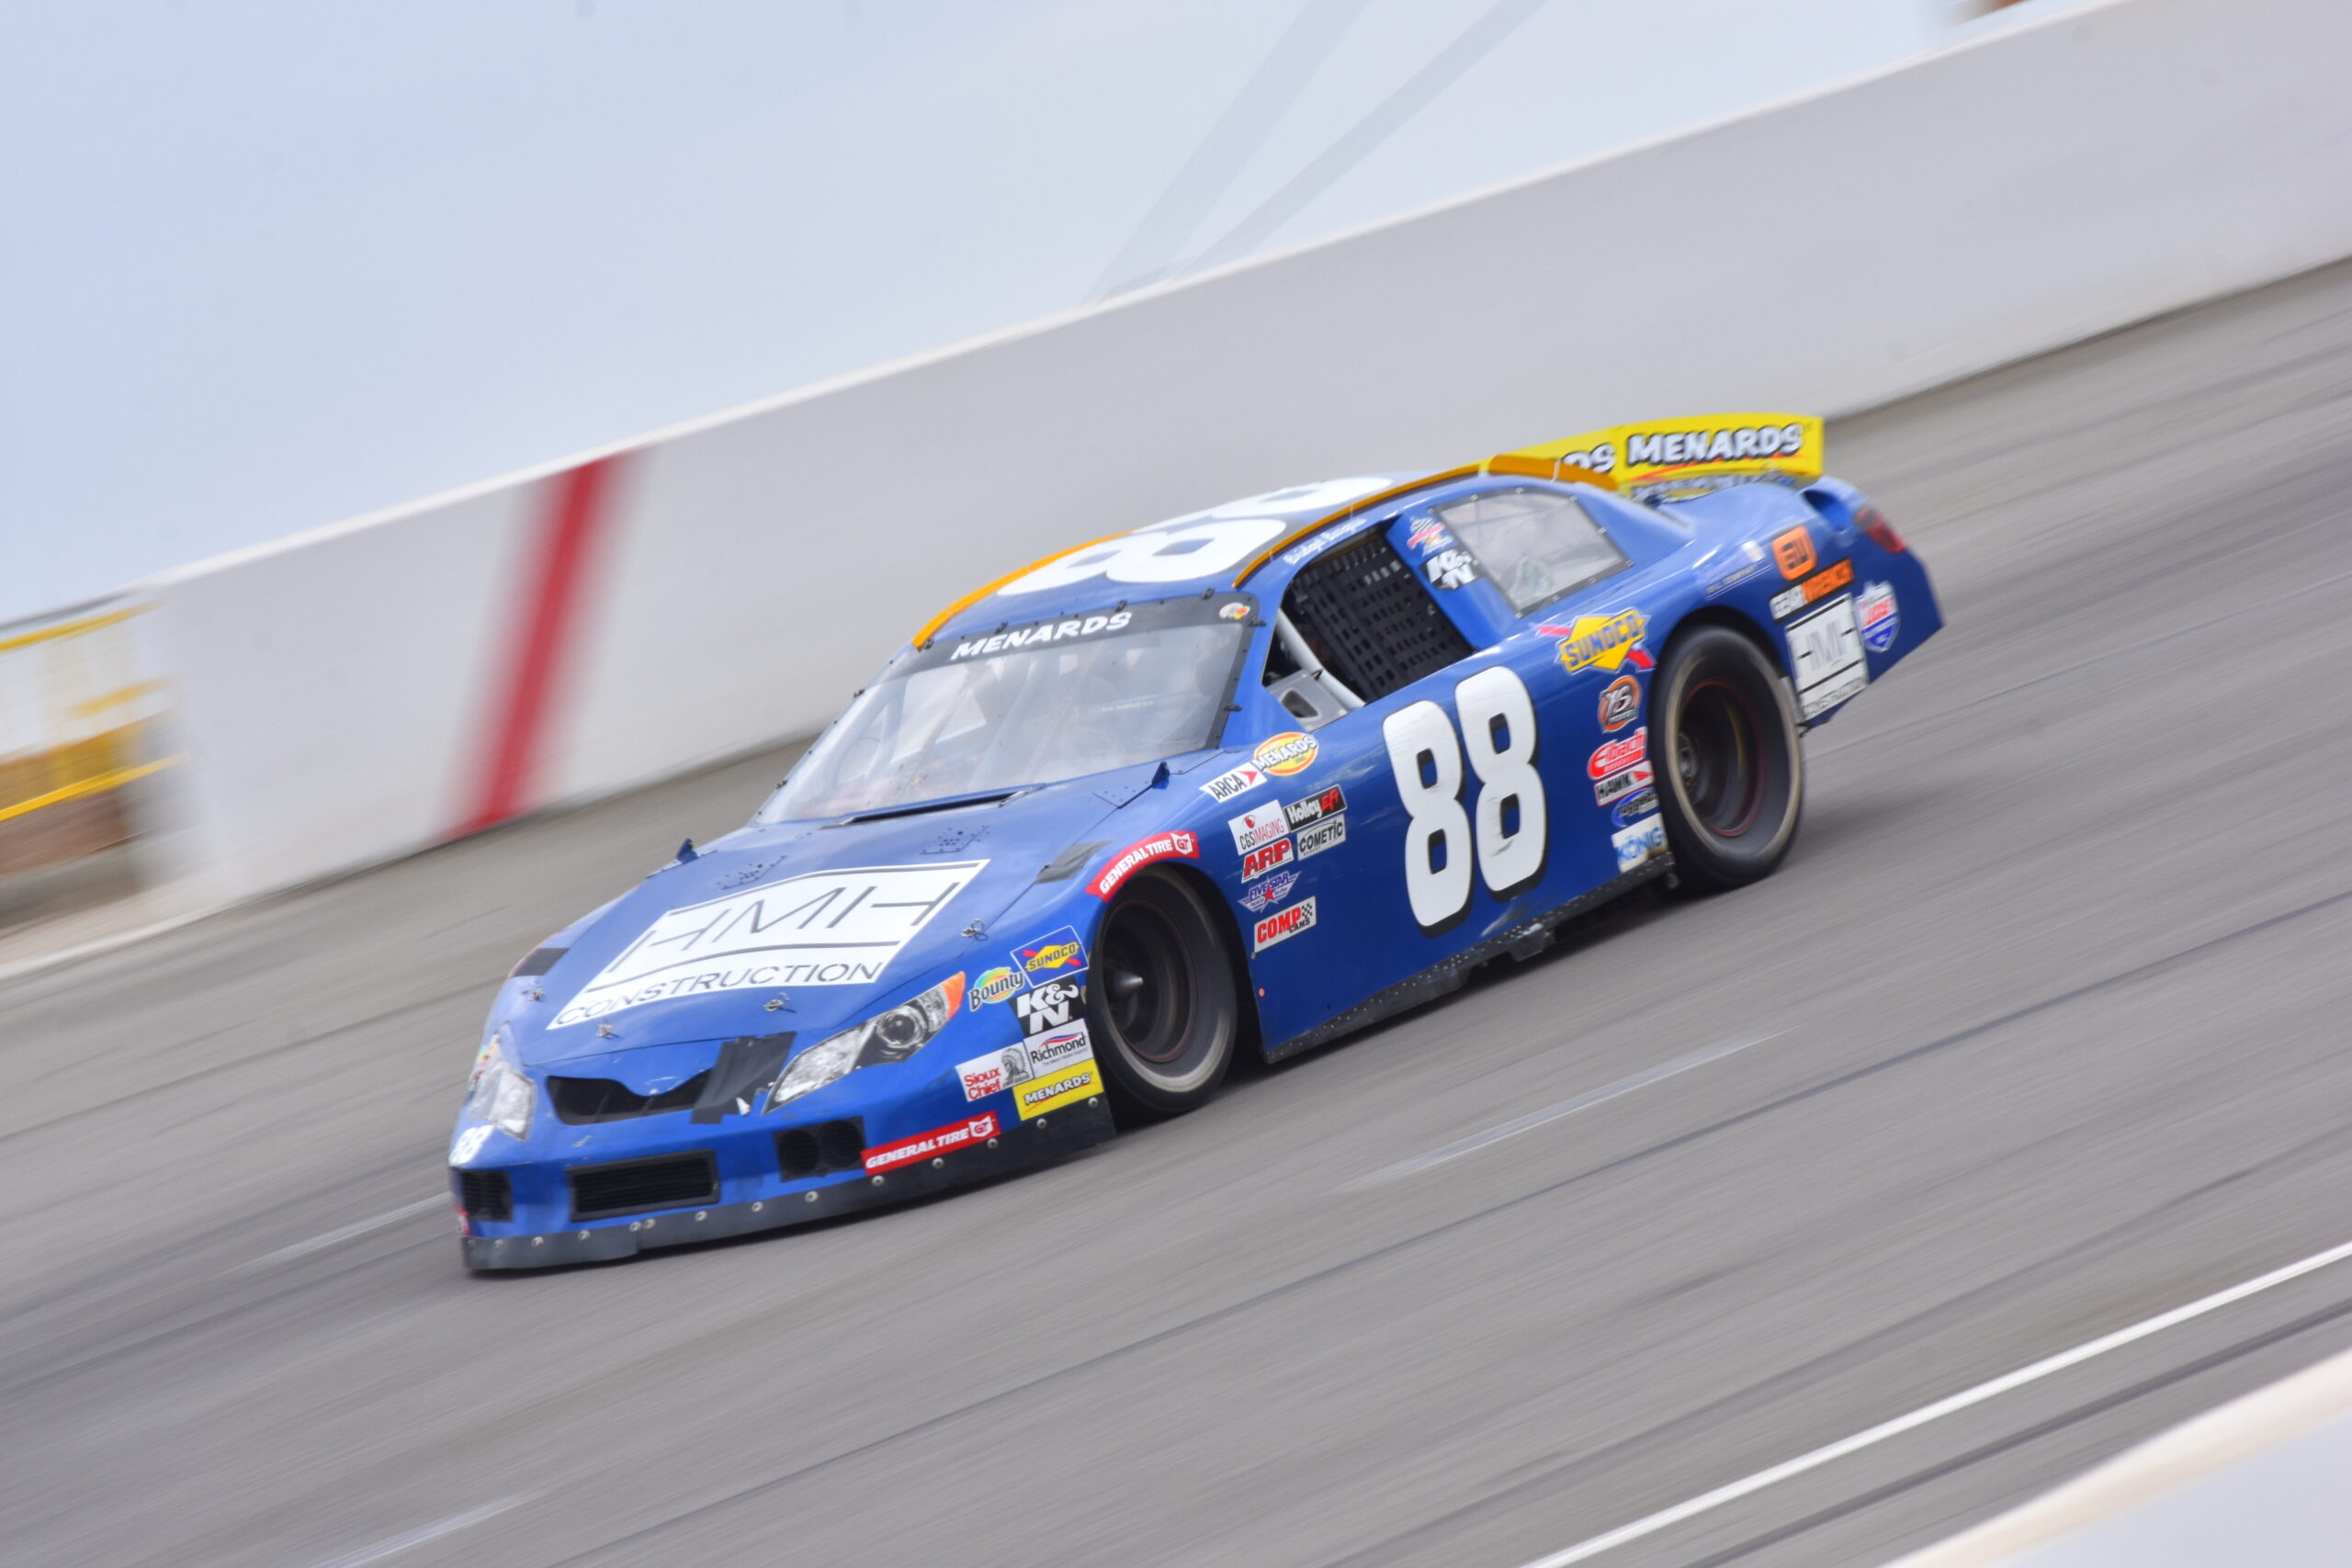 Formerly, Burgess piloted the "old blue" No. 88 ride. (Photo: Luis Torres/The Podium Finish)